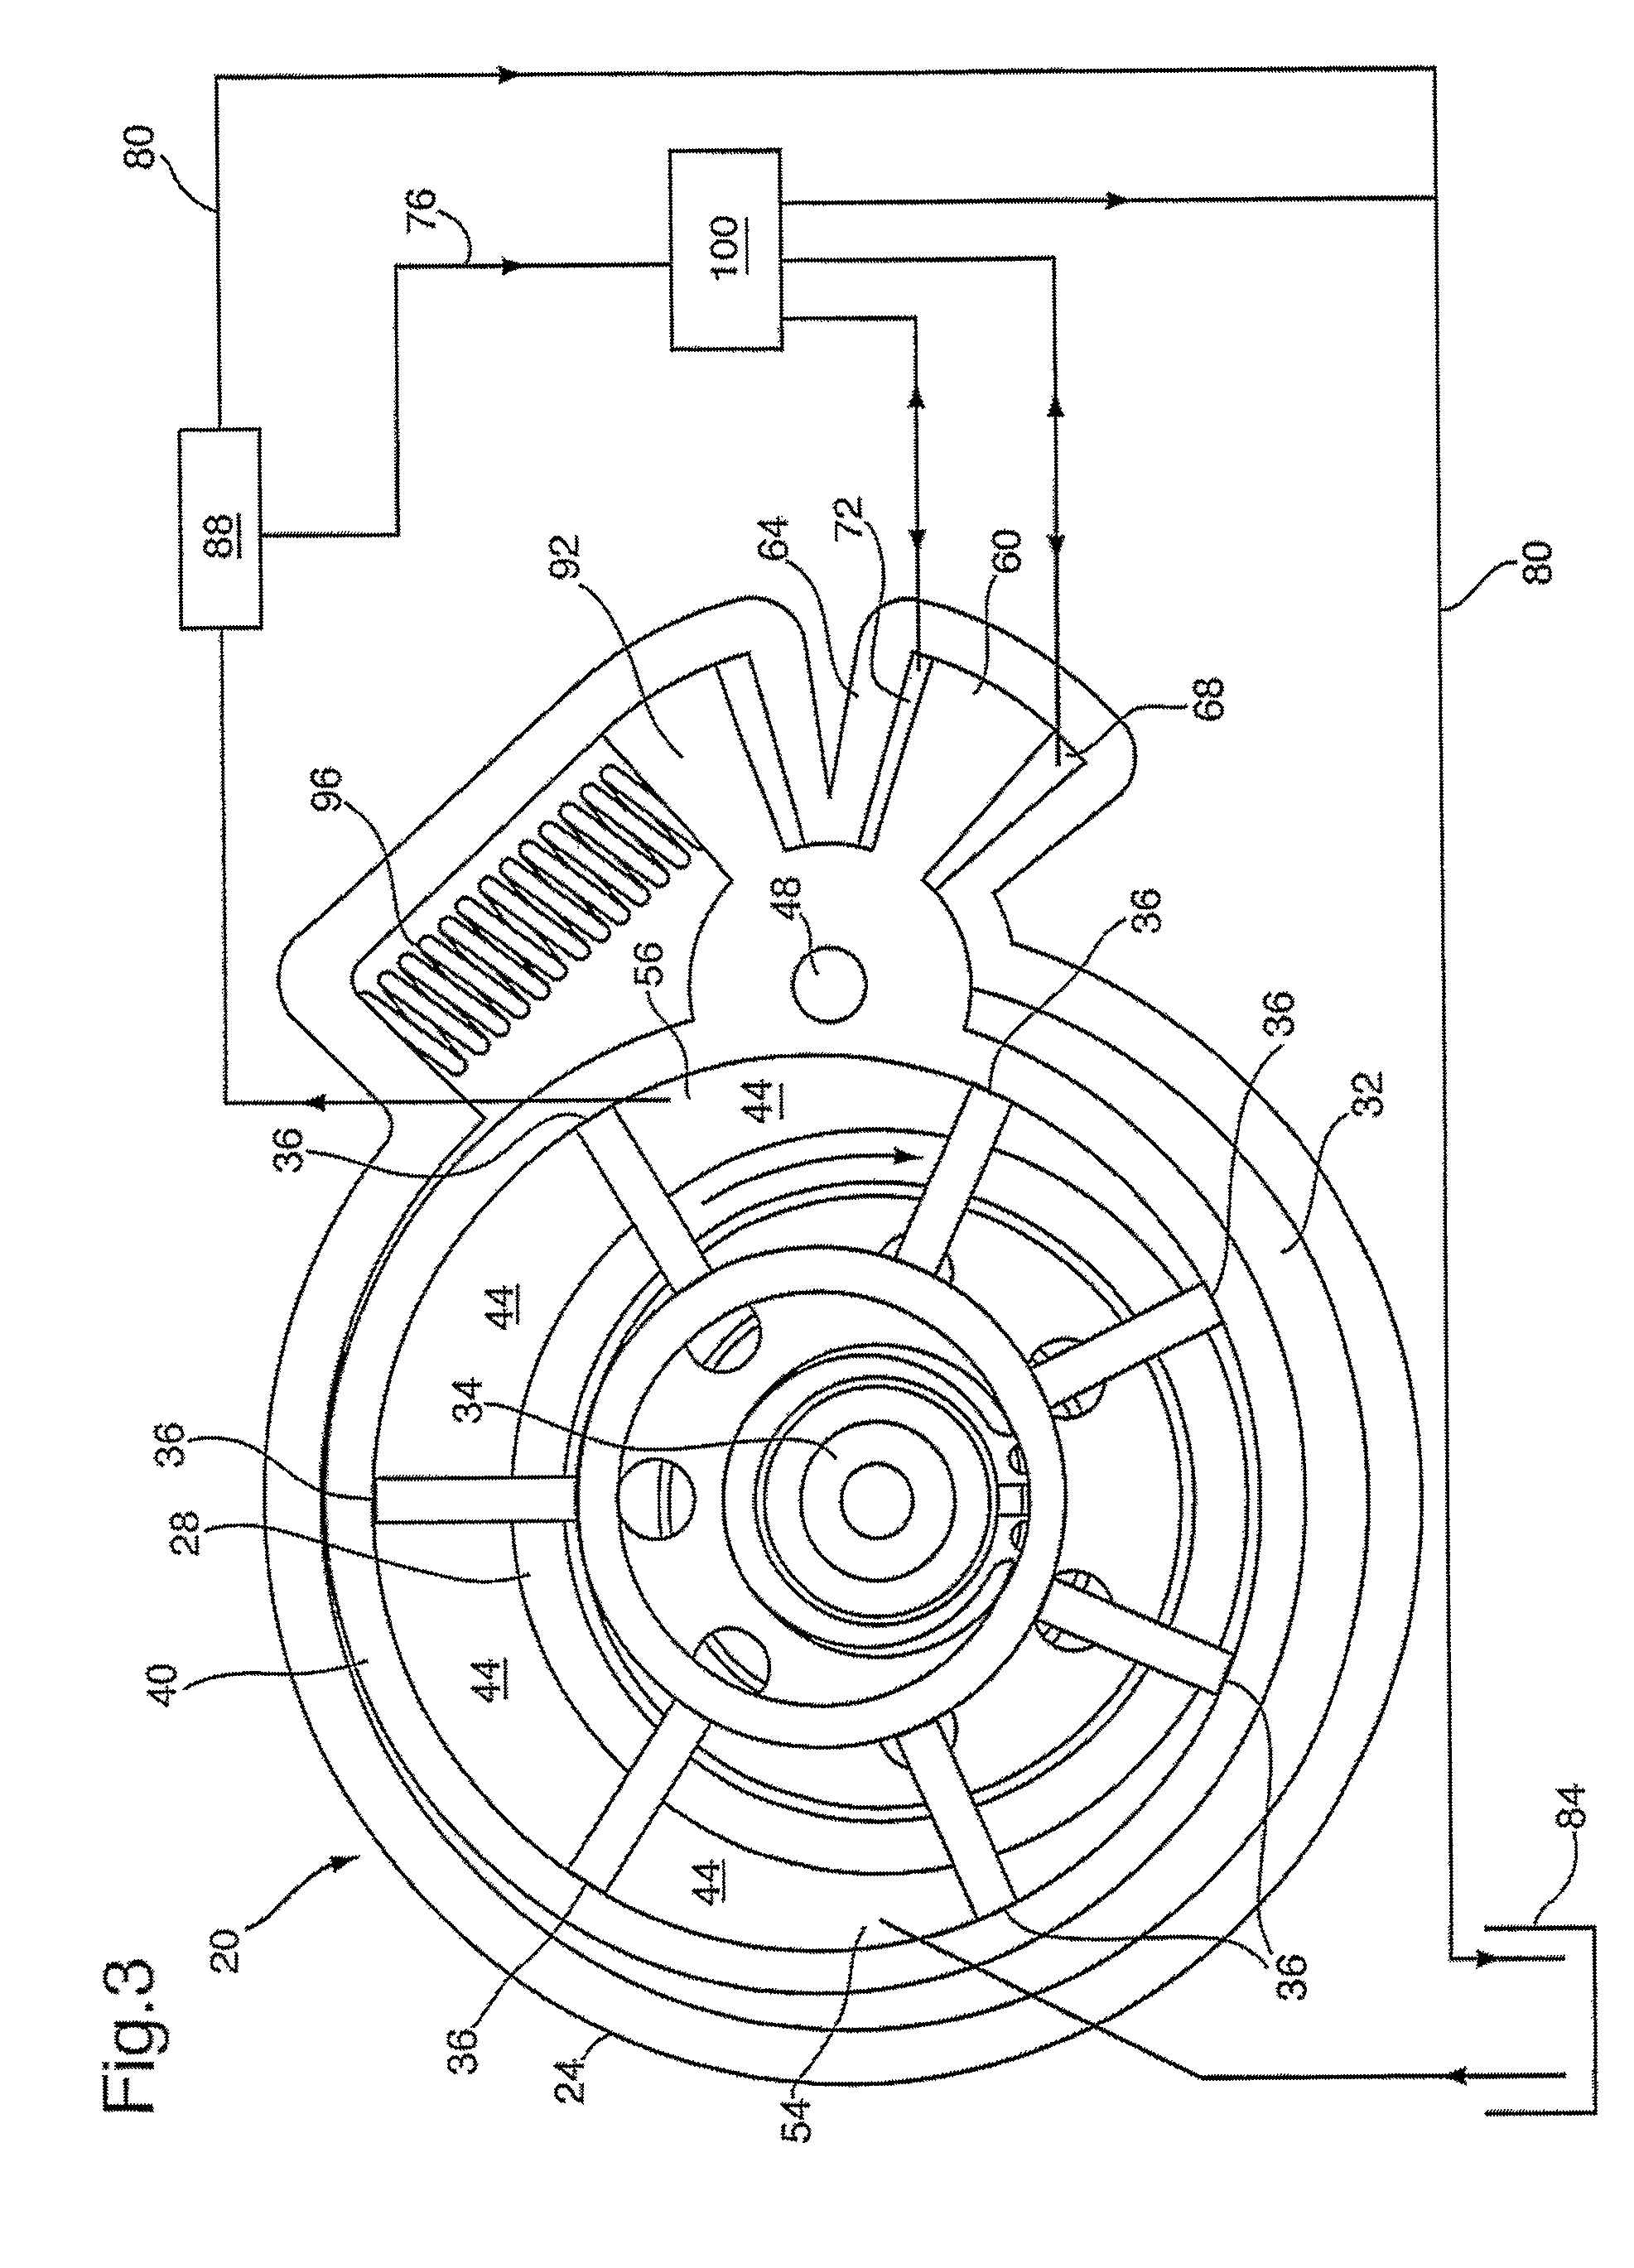 Continuously variable displacement vane pump and system